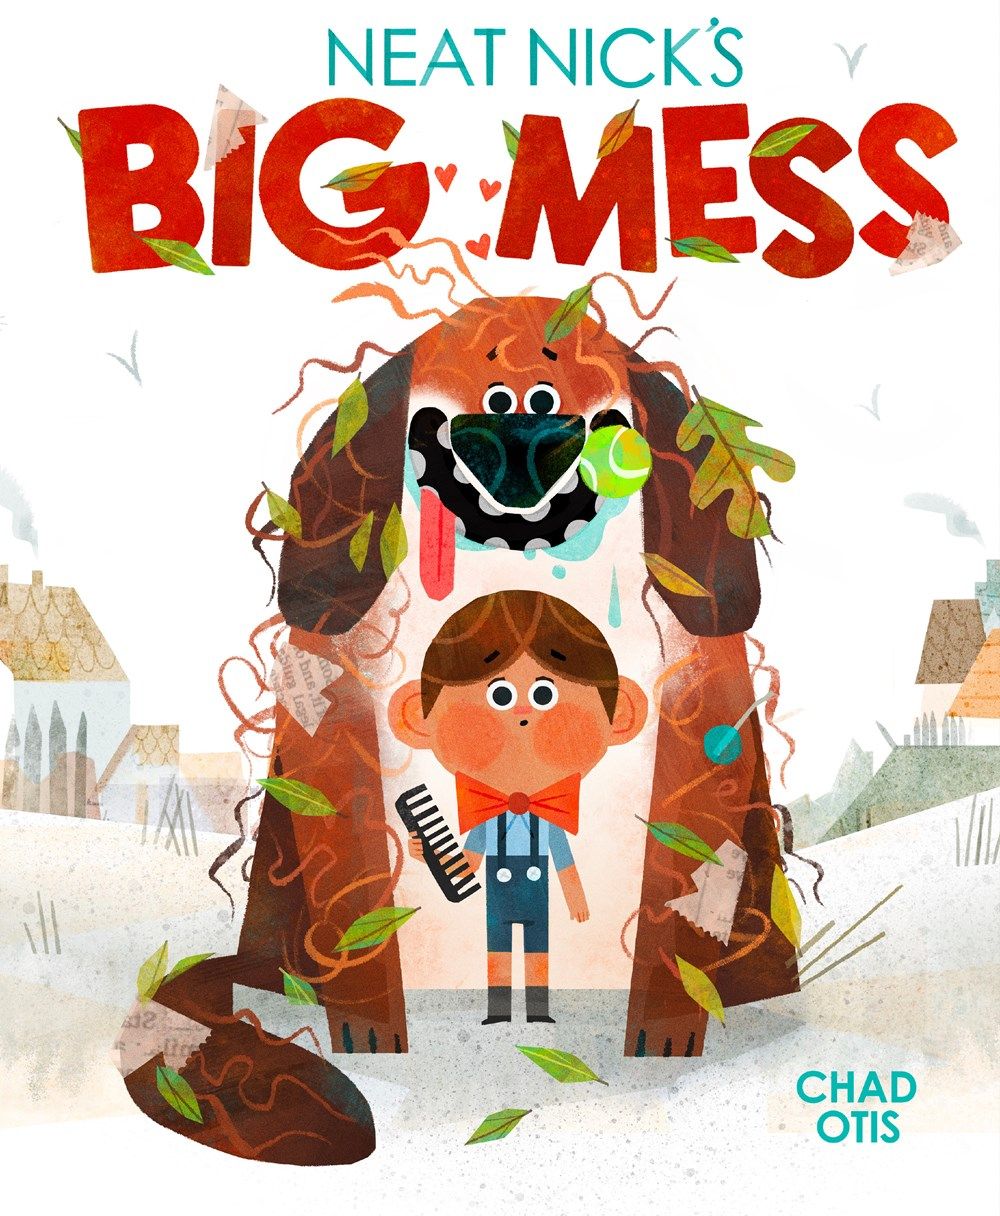 Cover of Neat Nick's Big Mess by Chad Otis